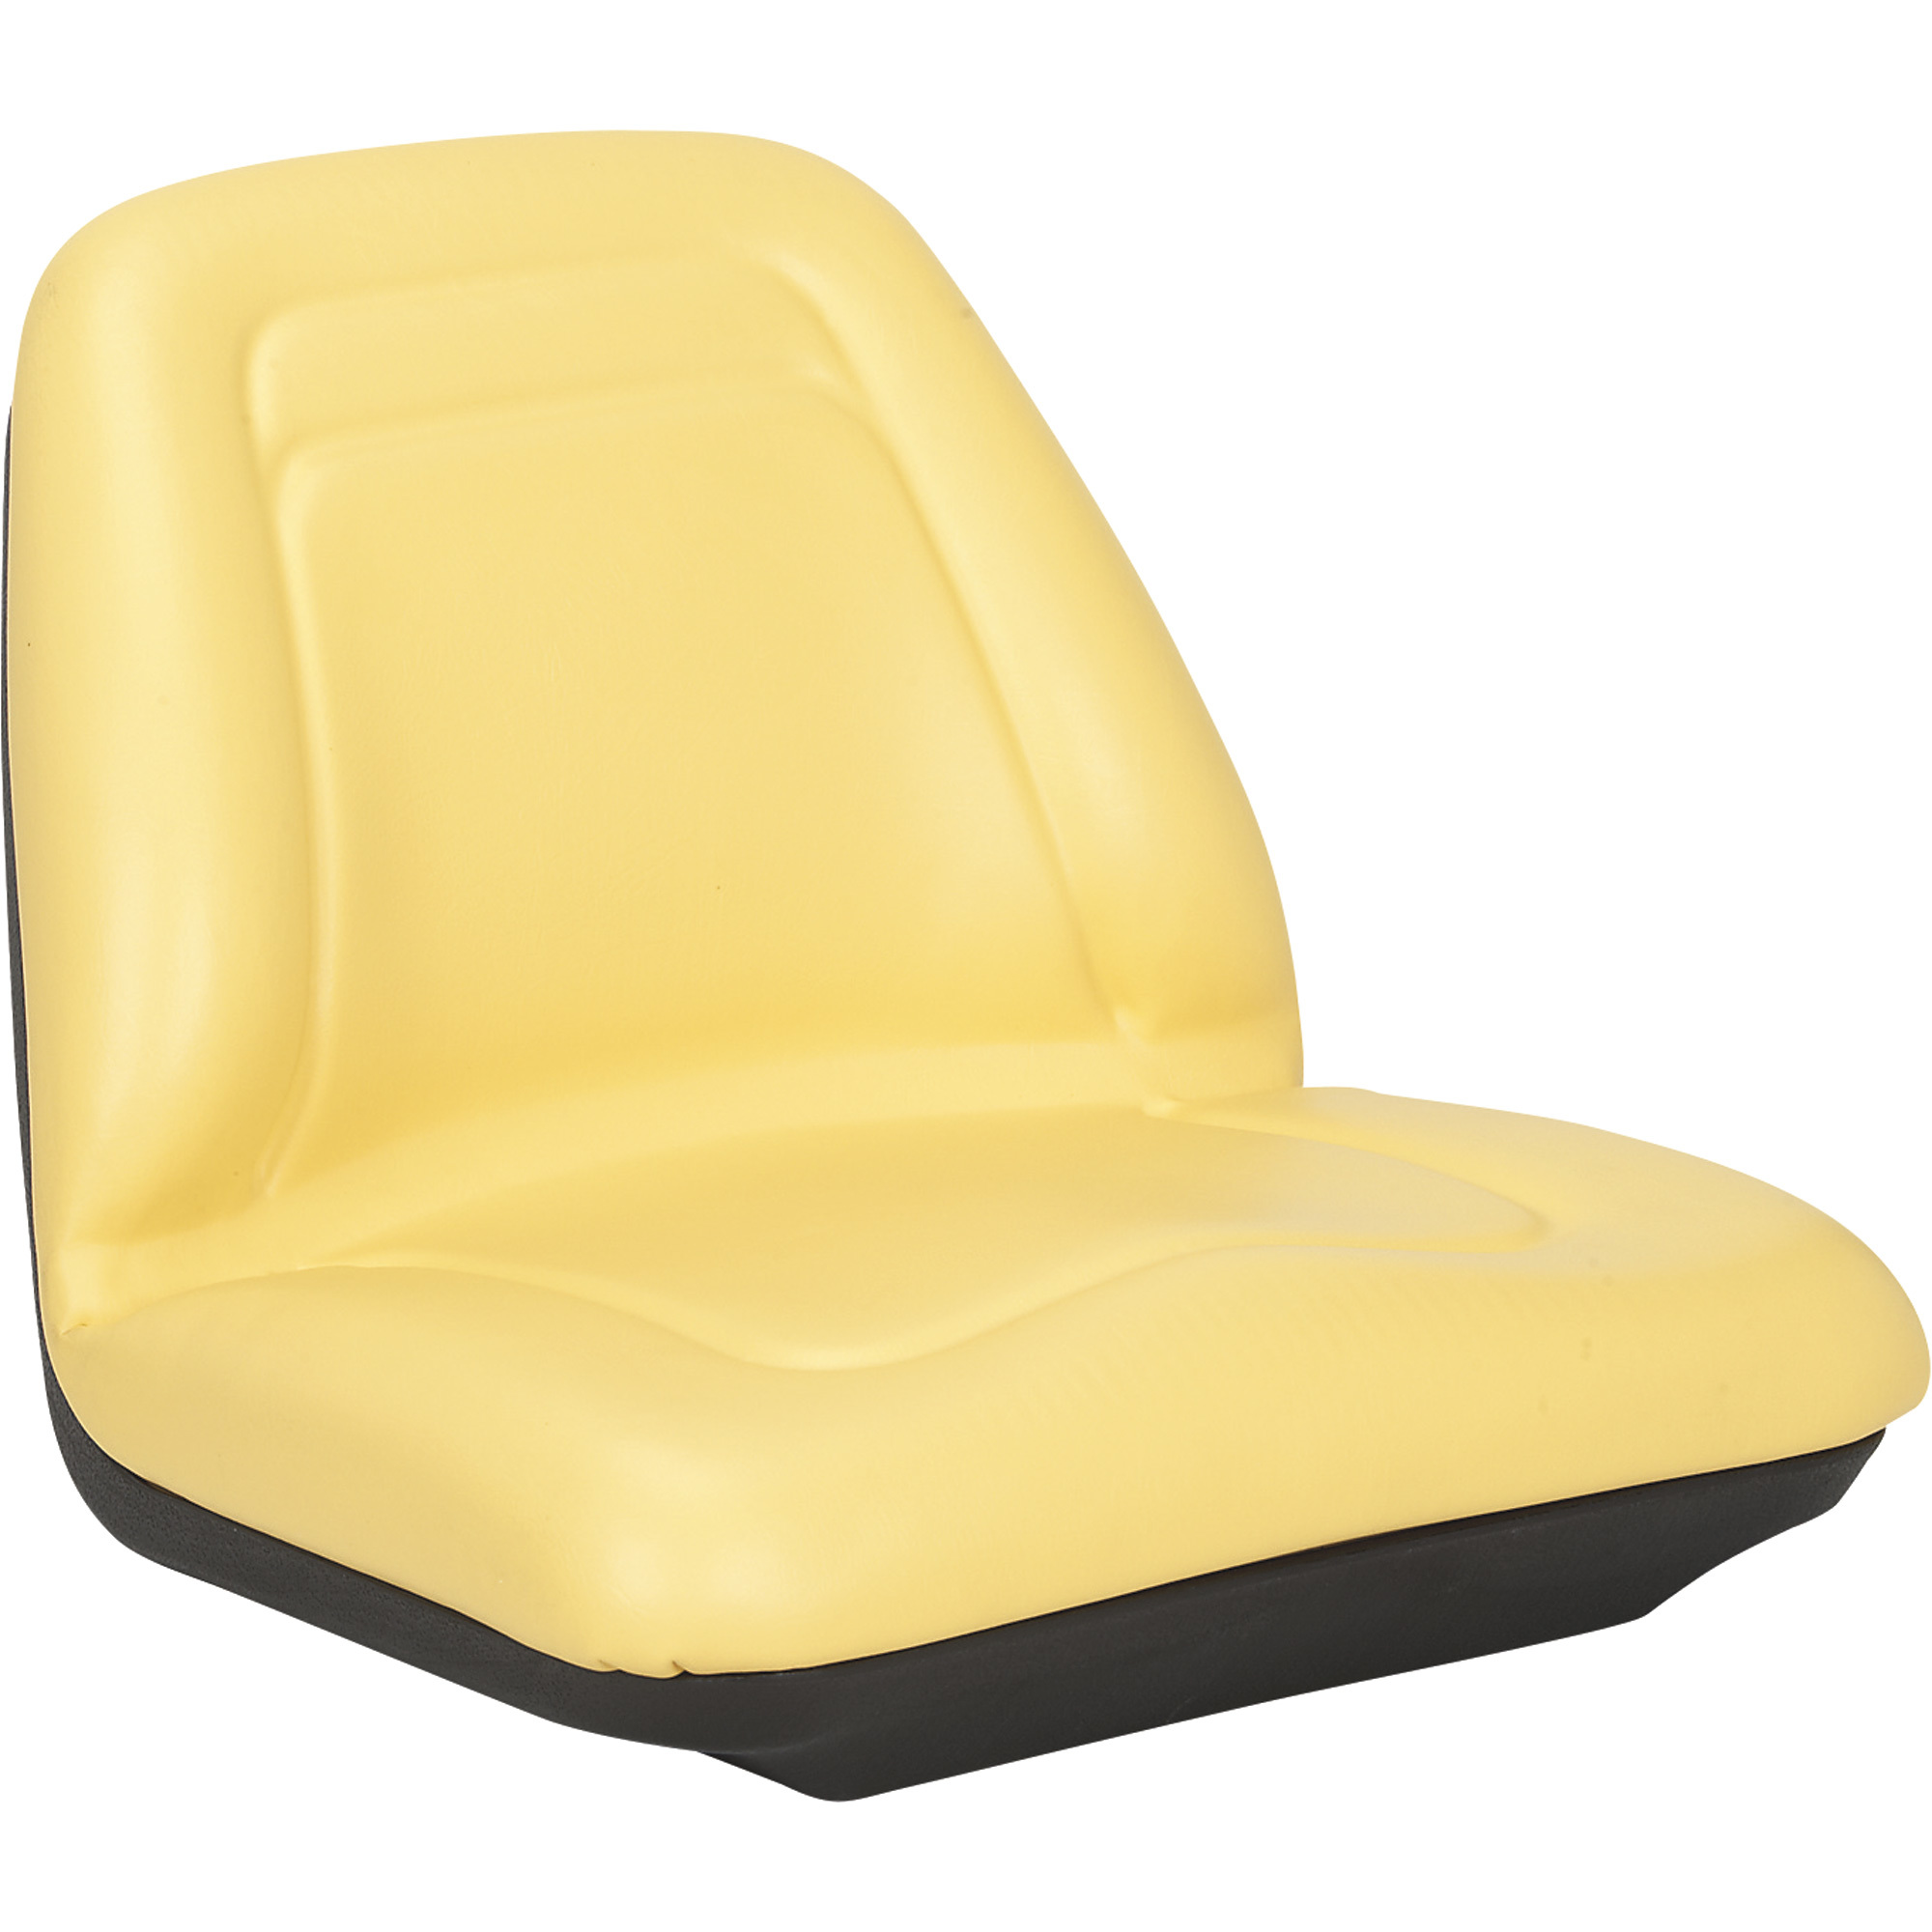 A & I Deluxe Mid-Back Utility Lawn Mower Seat â Yellow, Model TM555YL